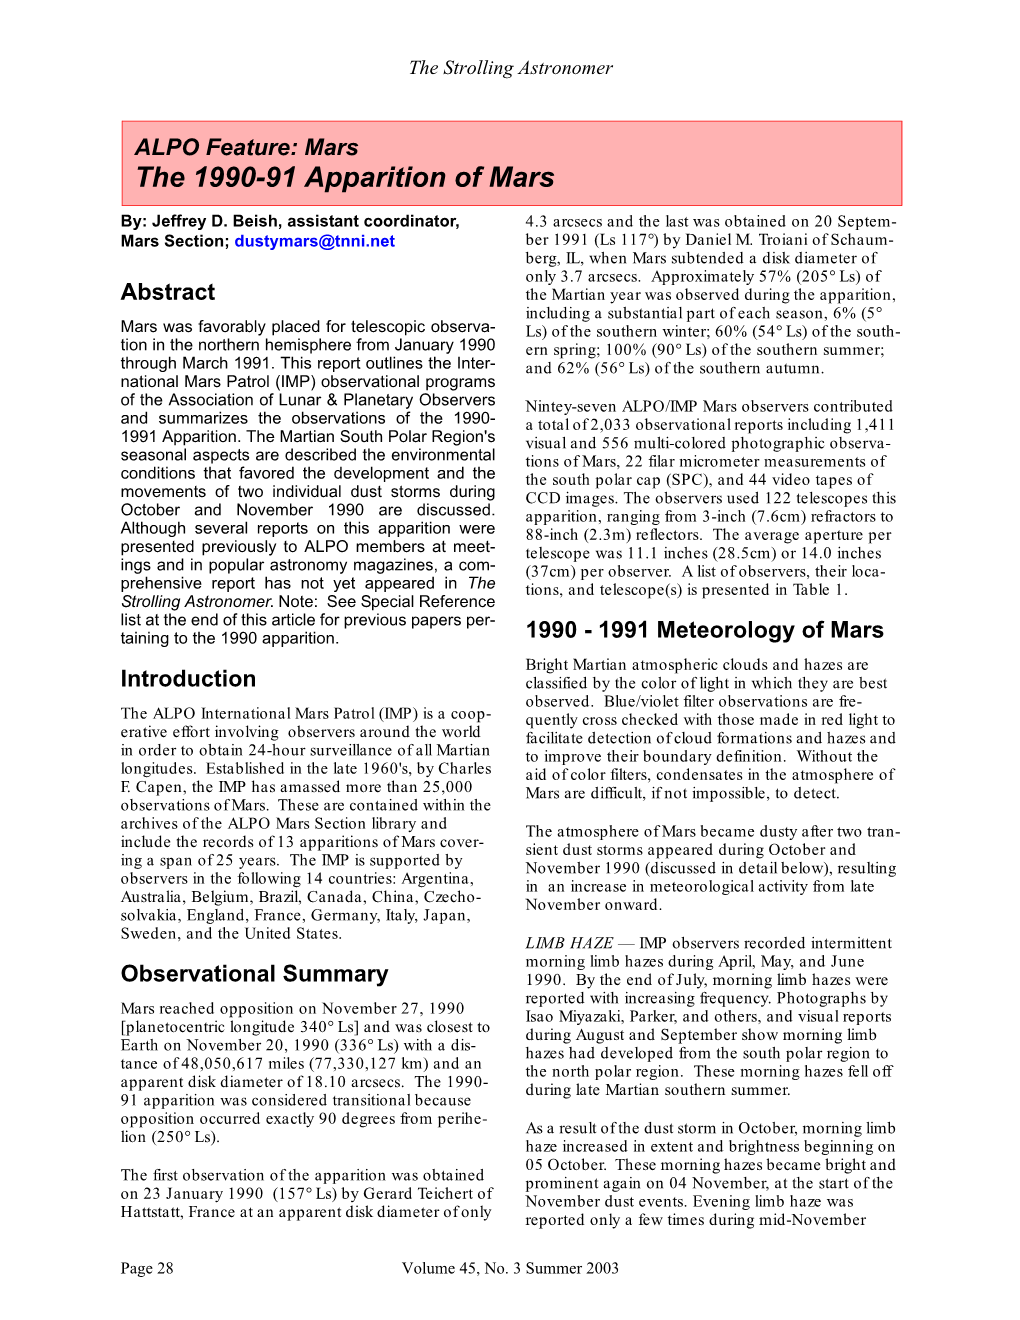 The 1990-91 Apparition of Mars